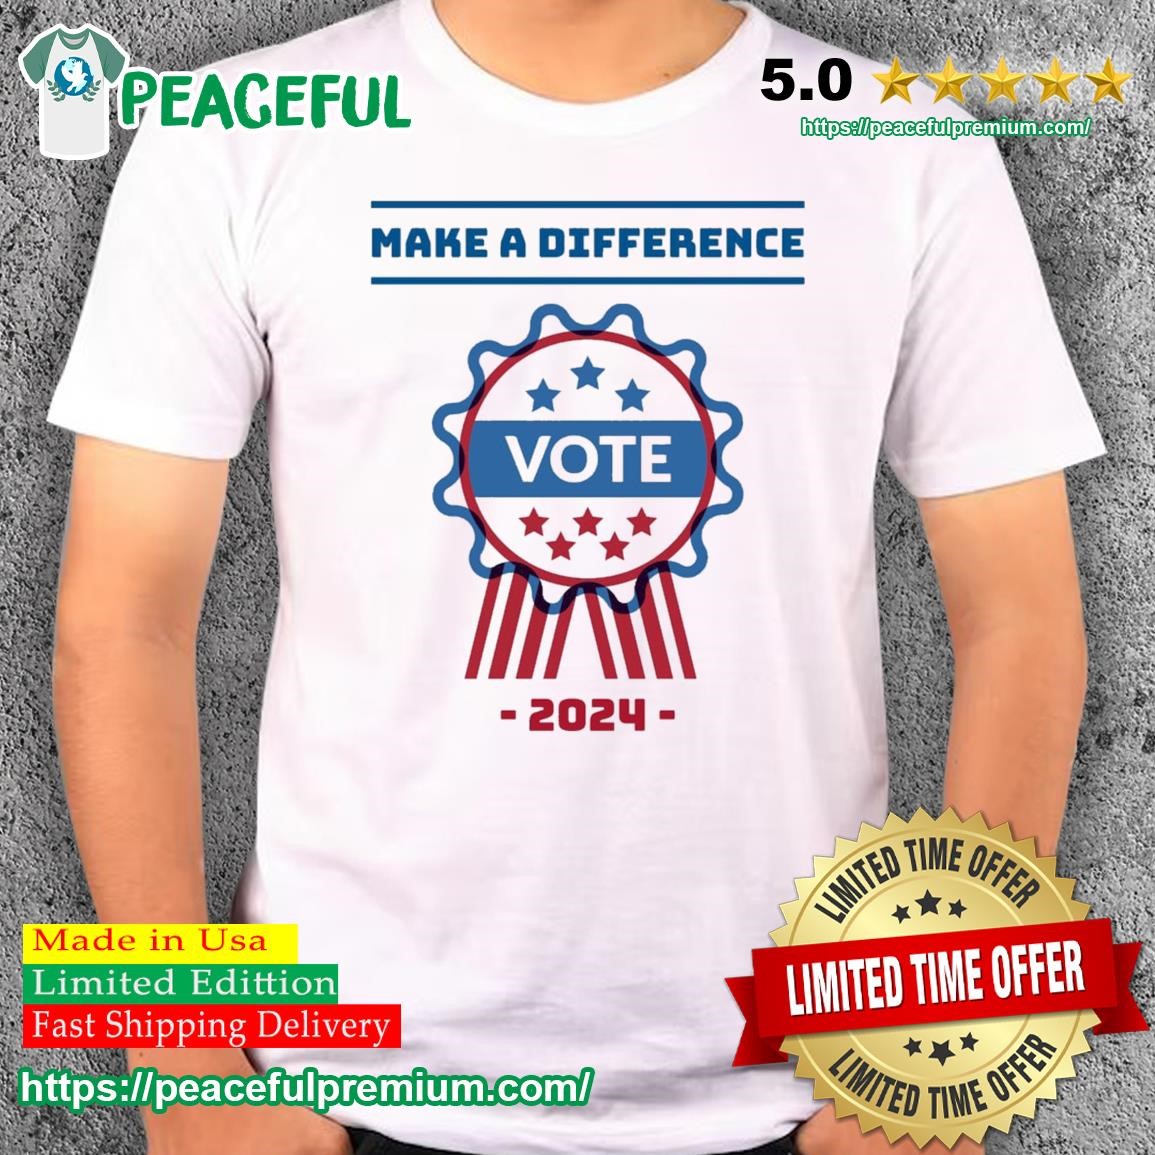 Make a difference, Vote in 2024 TShirt